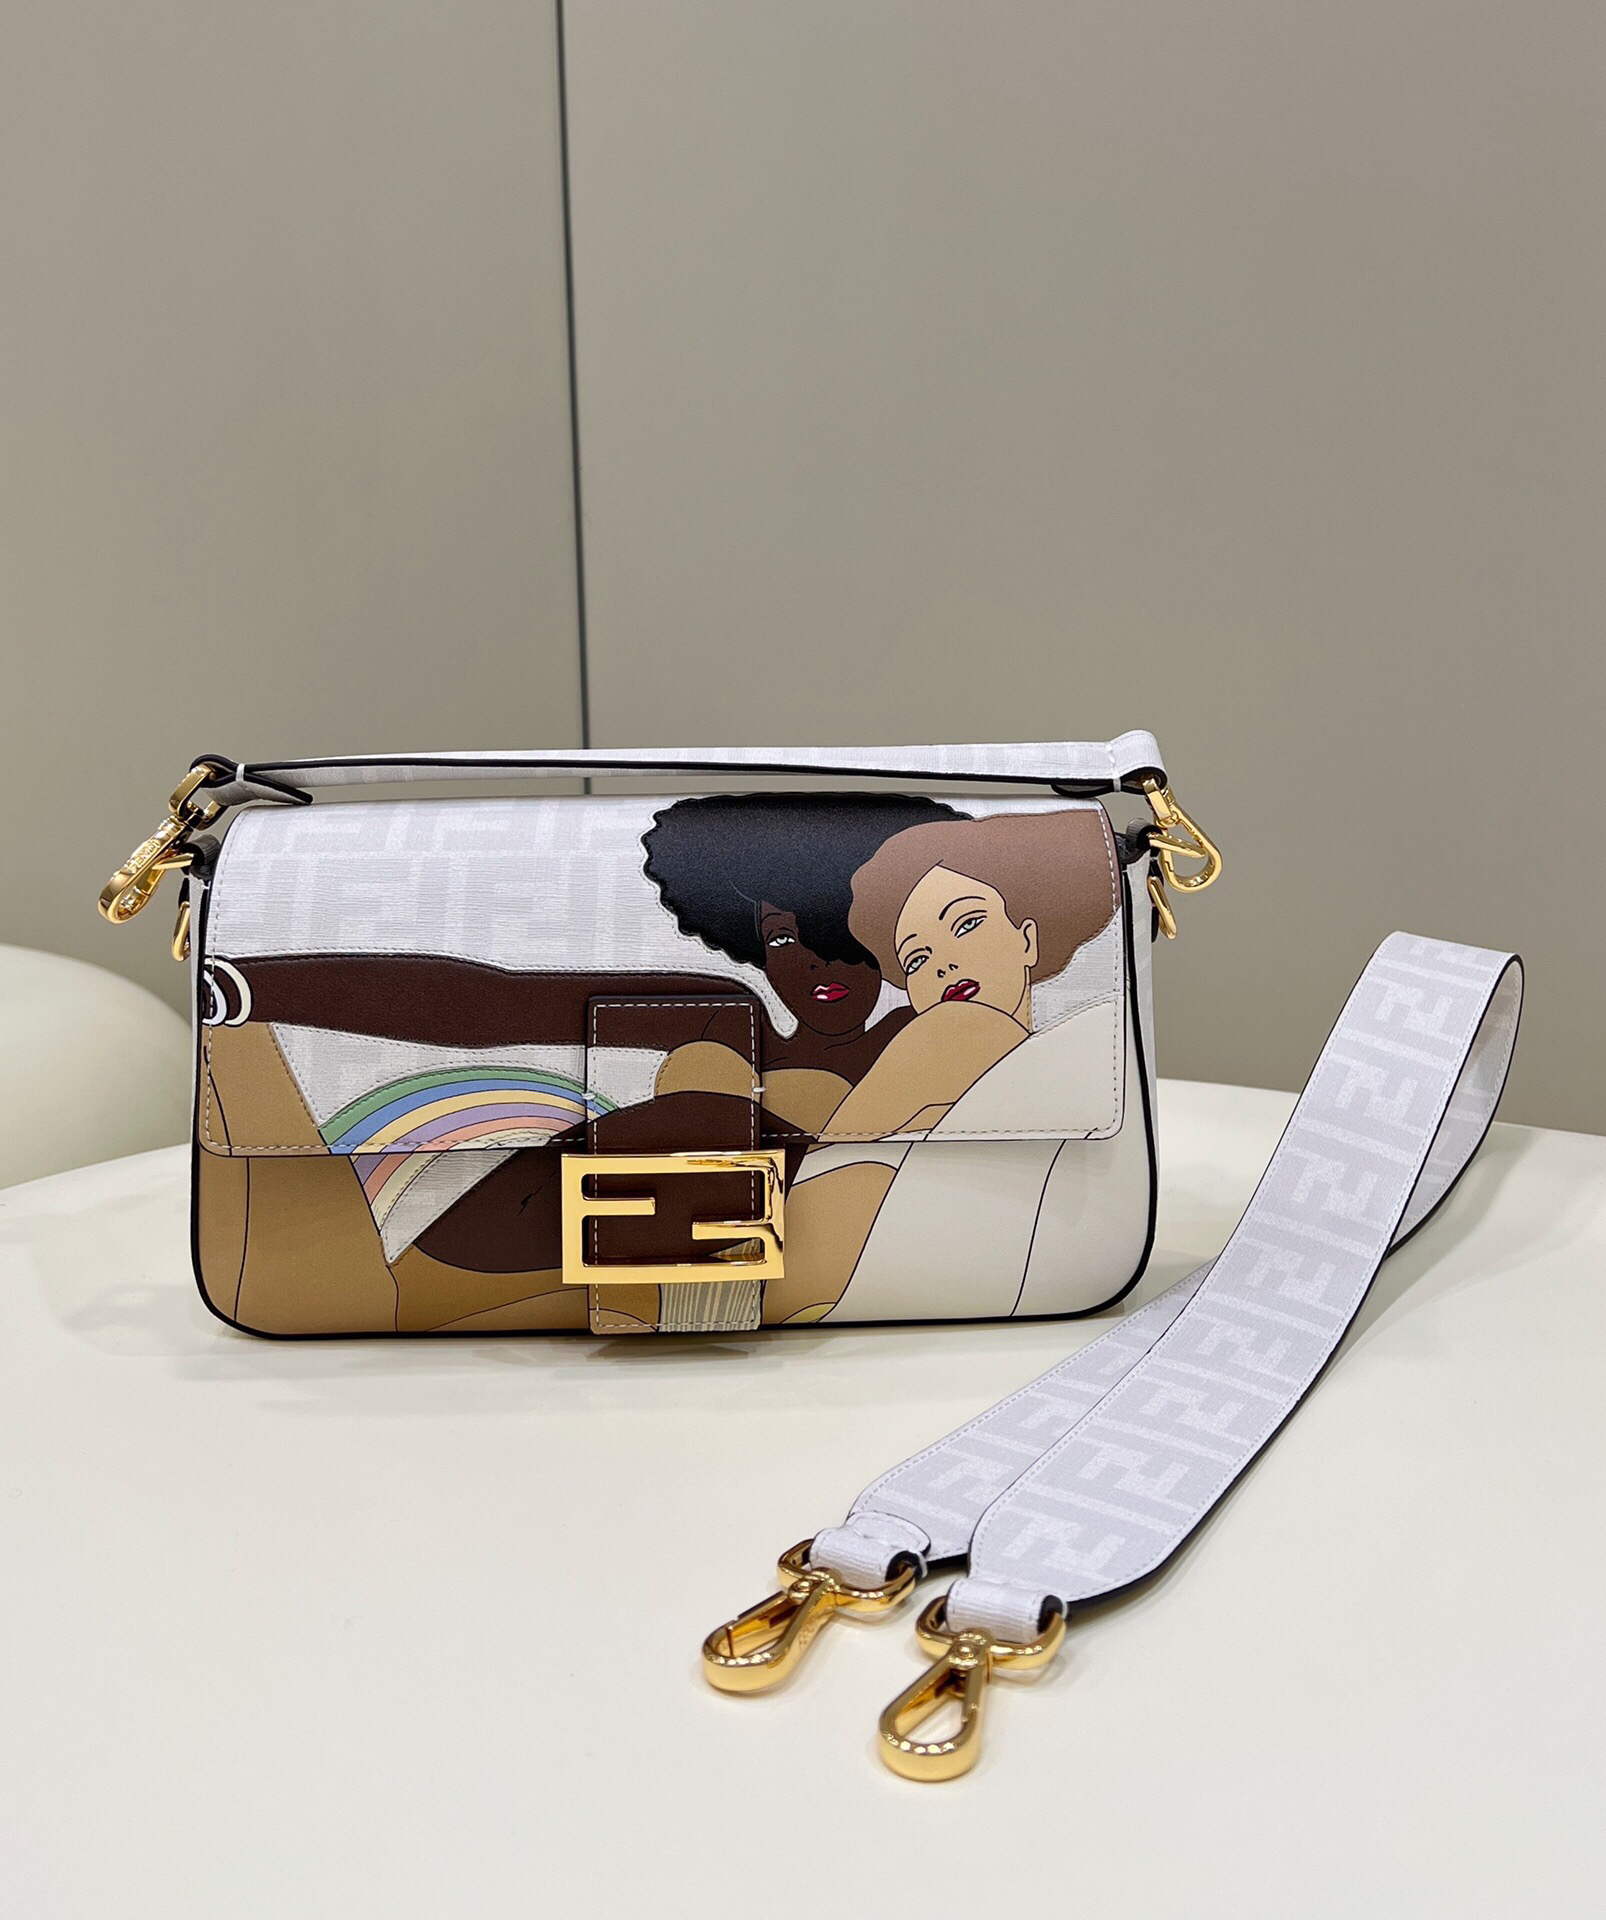 fendi-8br600-baguette-ff-white-glazed-fabric-bag-with-inlay-002-luxibags.ru